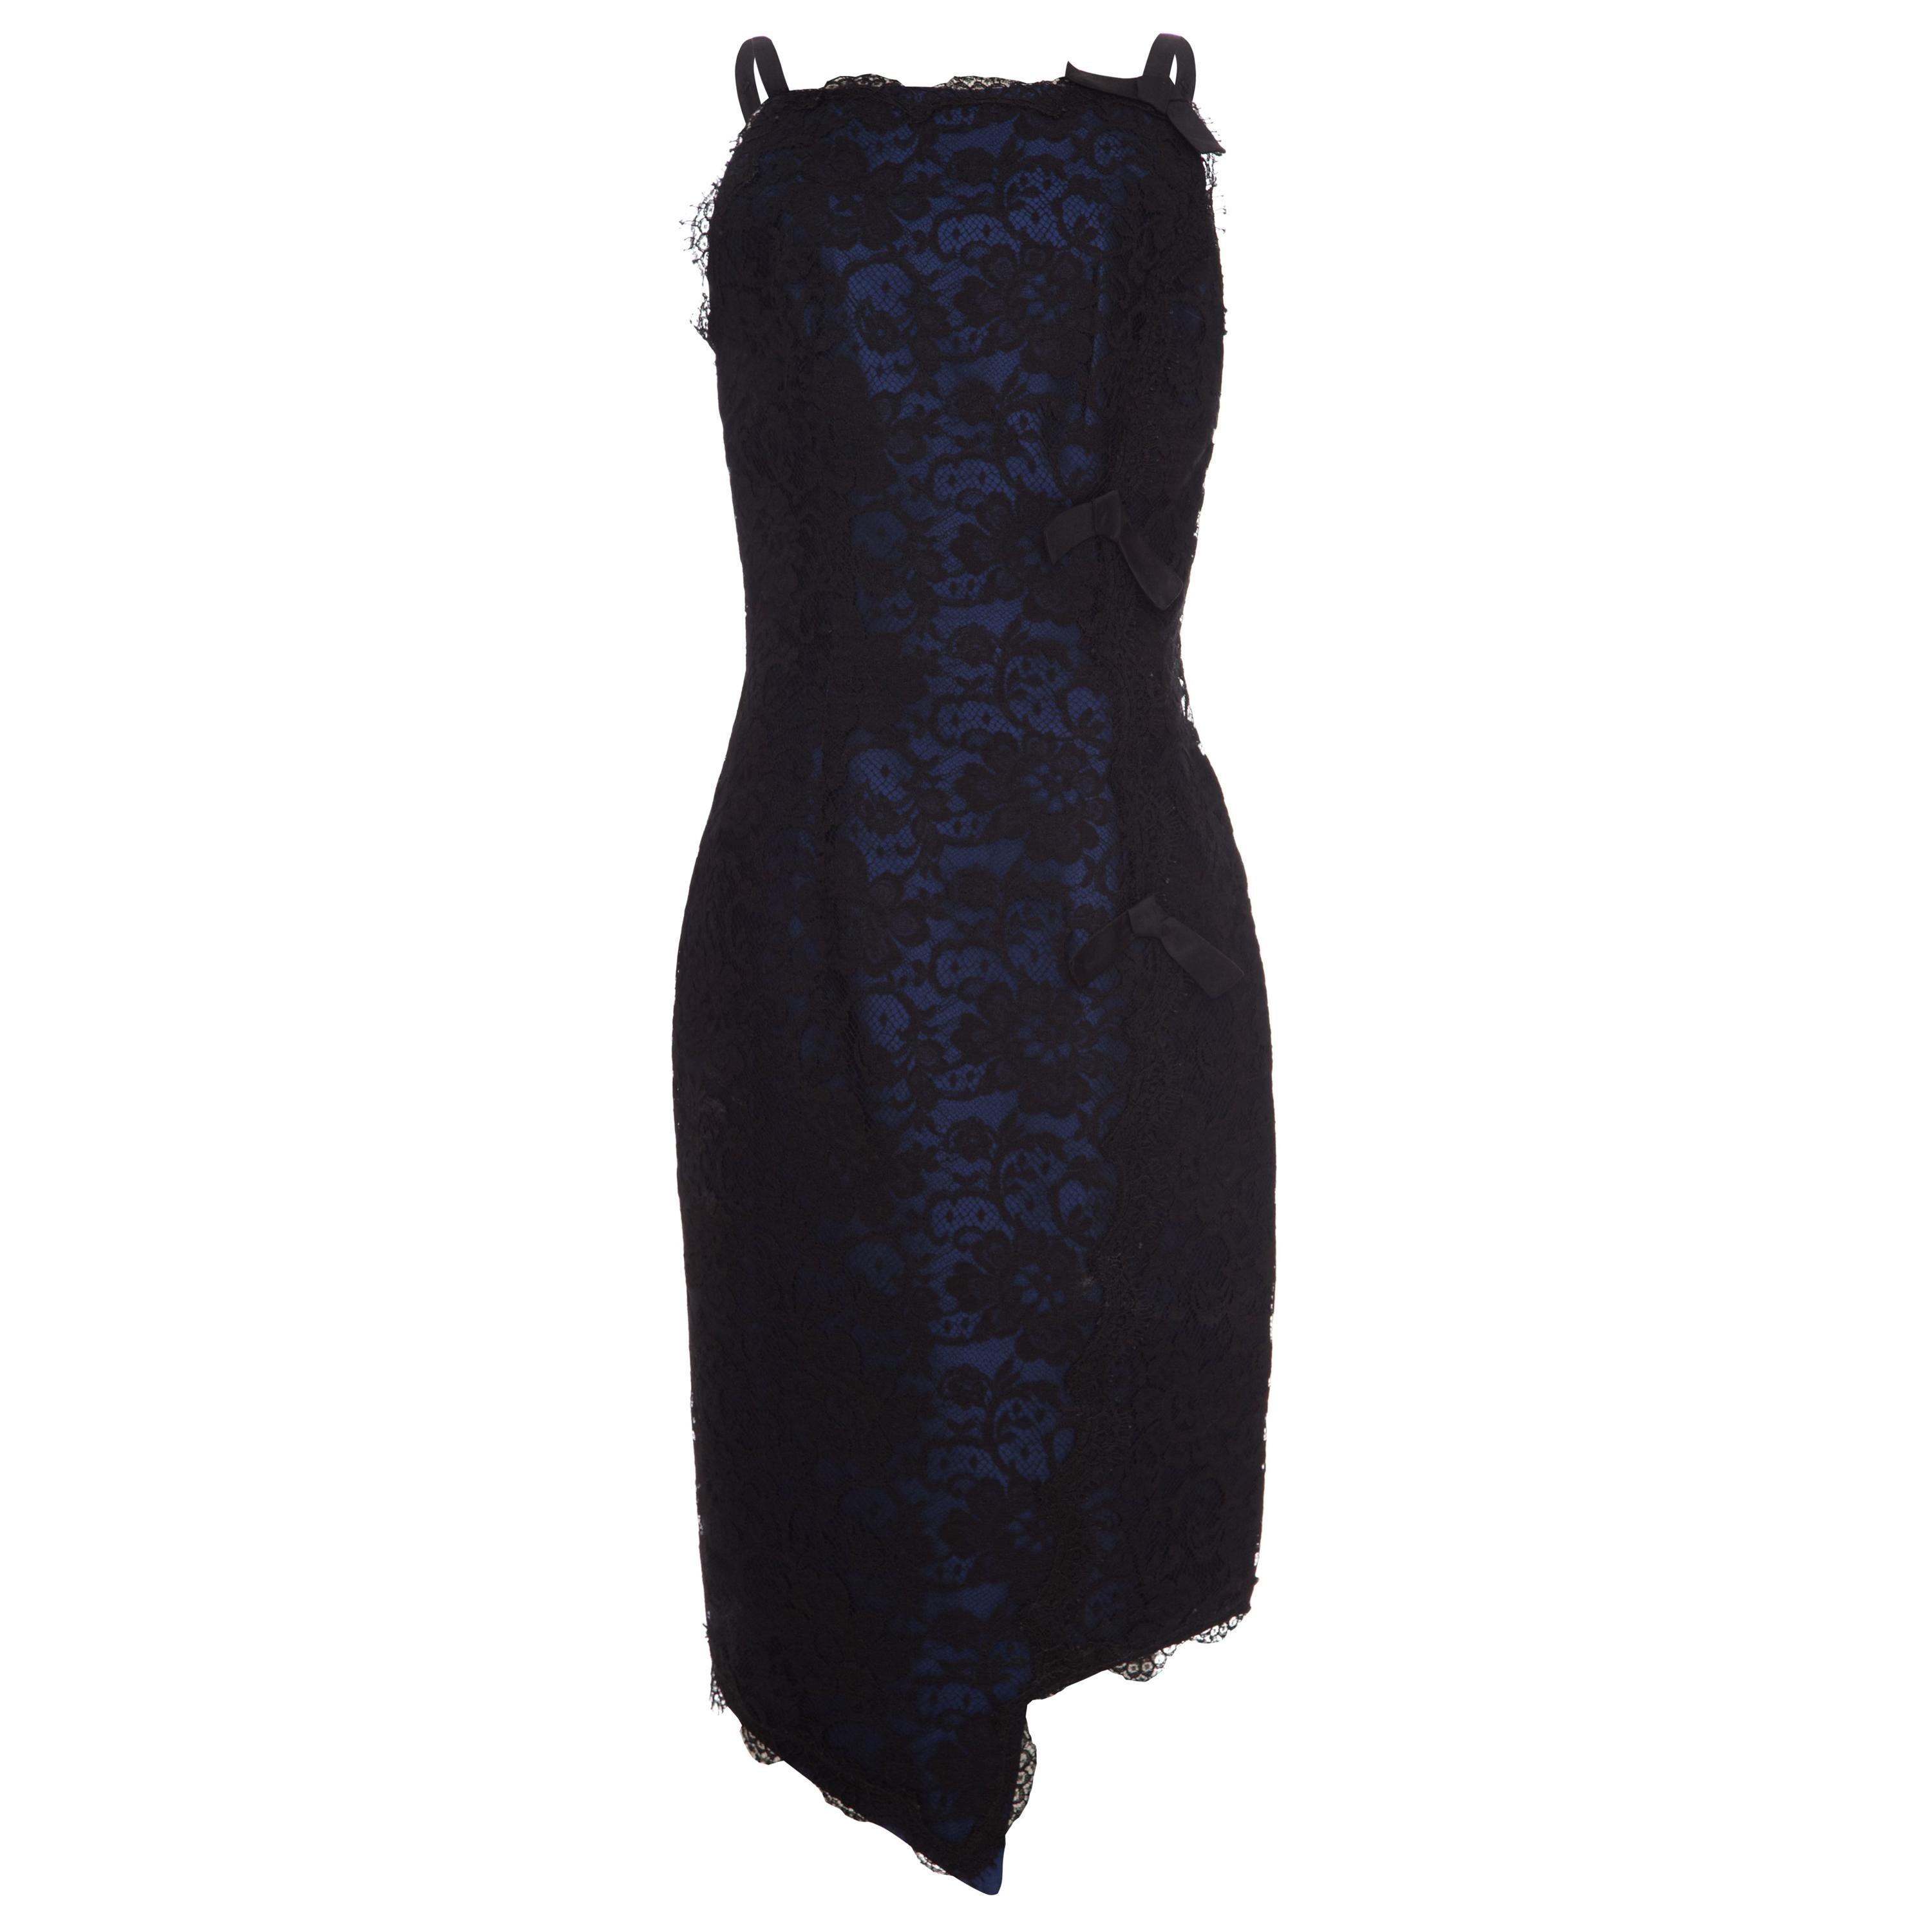 1990s David Fielden Couture Black Lace Dress with Blue Underlay